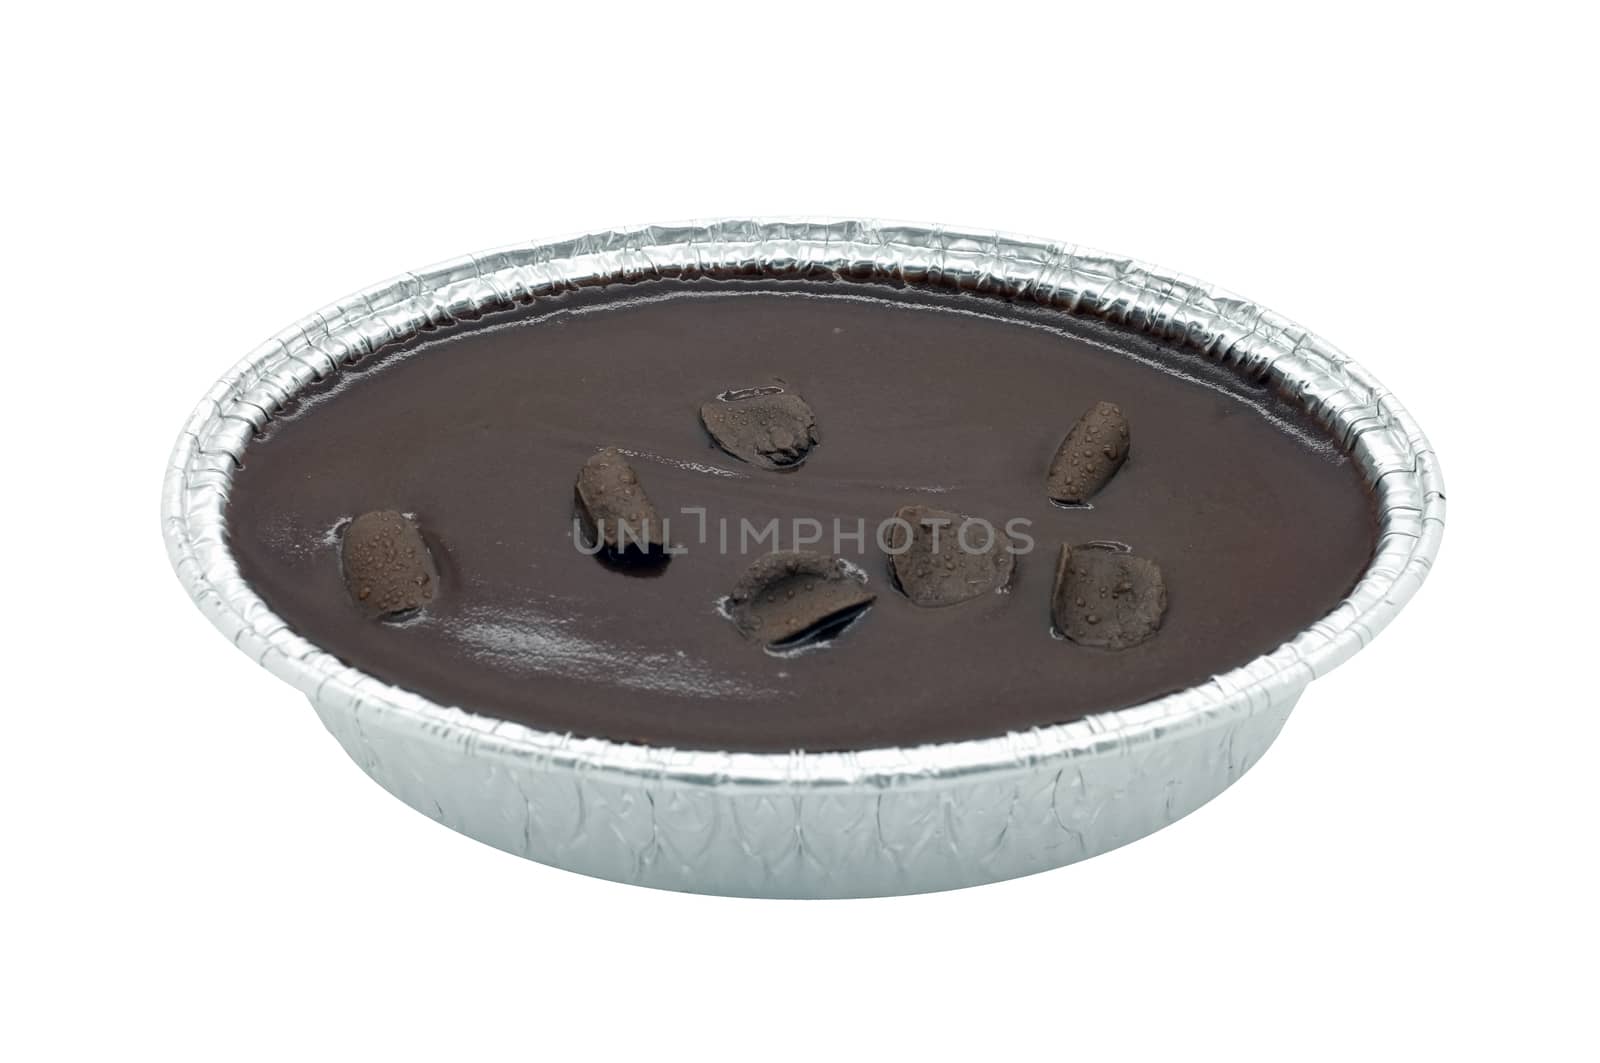 Chocolate cake in foil oval box by Hepjam